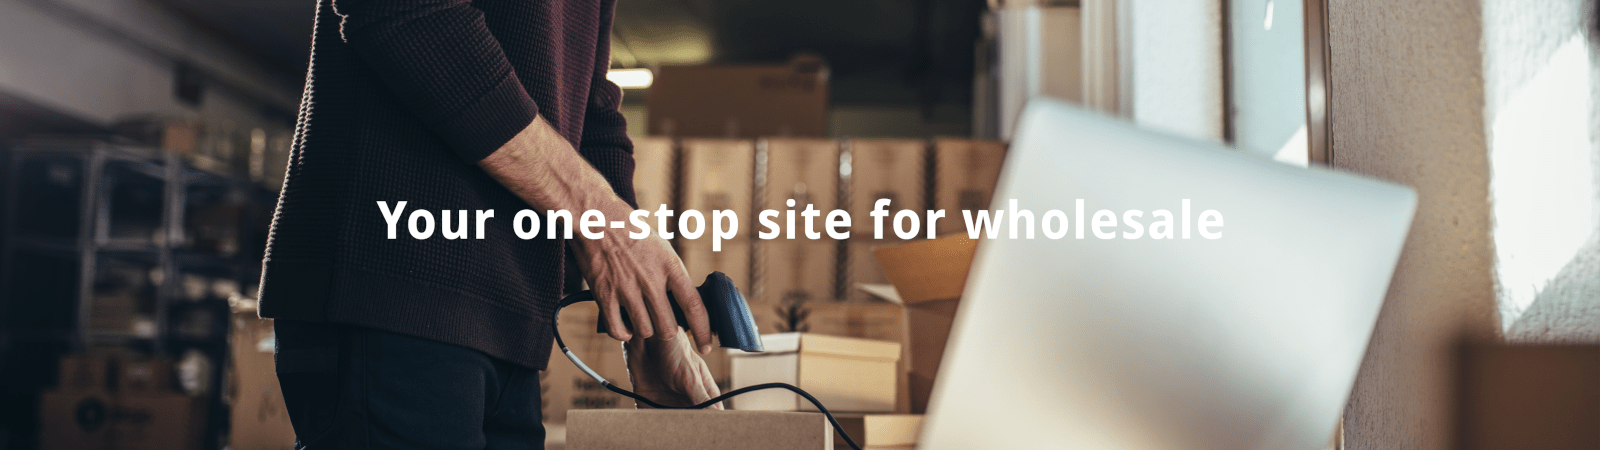 Your one-stop site for wholesale